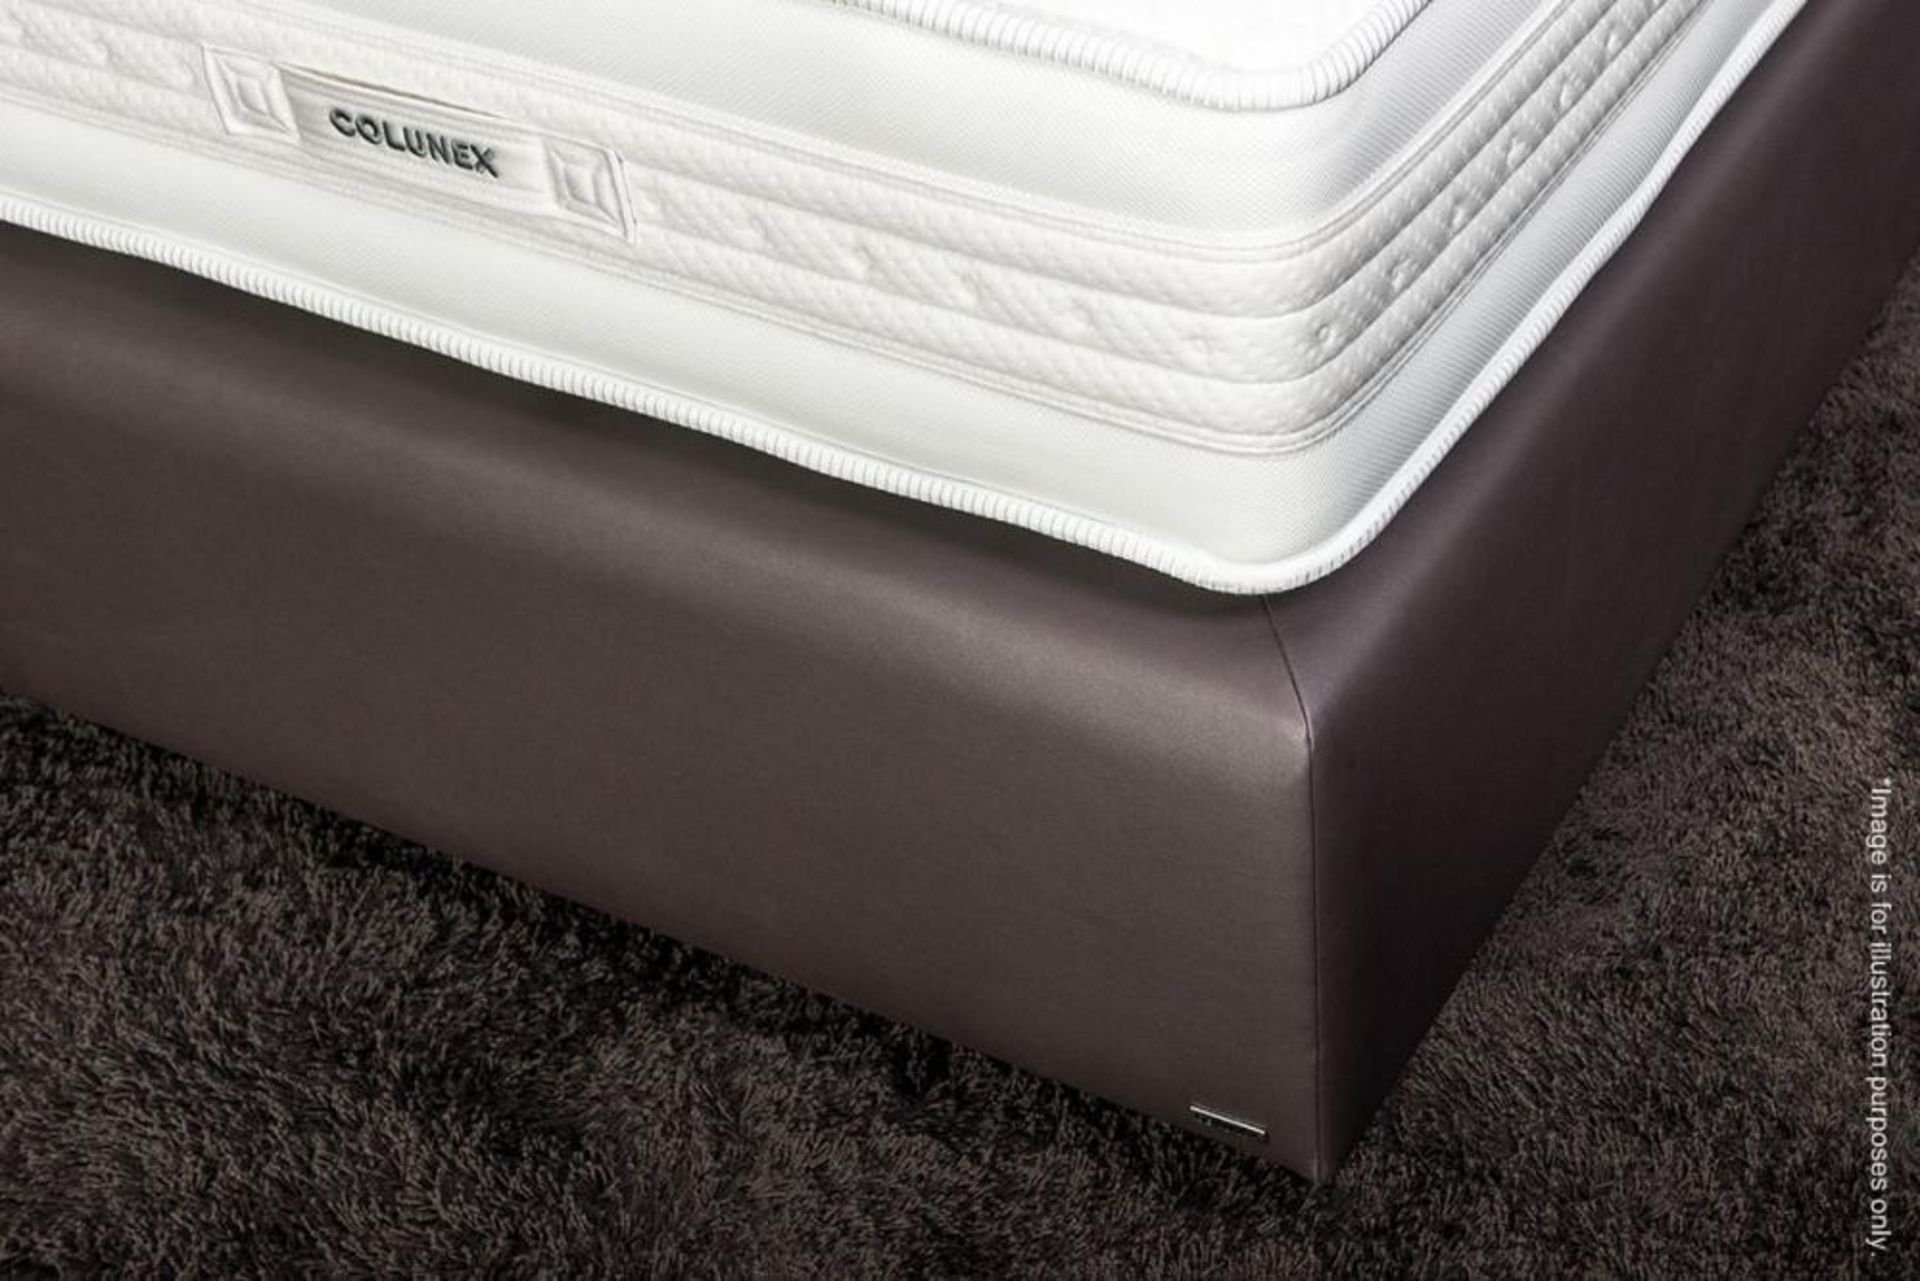 1 x Colunex 'Easy' Kingsize Bed Base - Upholstered In Grey Leather With Stylish Metal Feet - Dimensi - Image 7 of 11